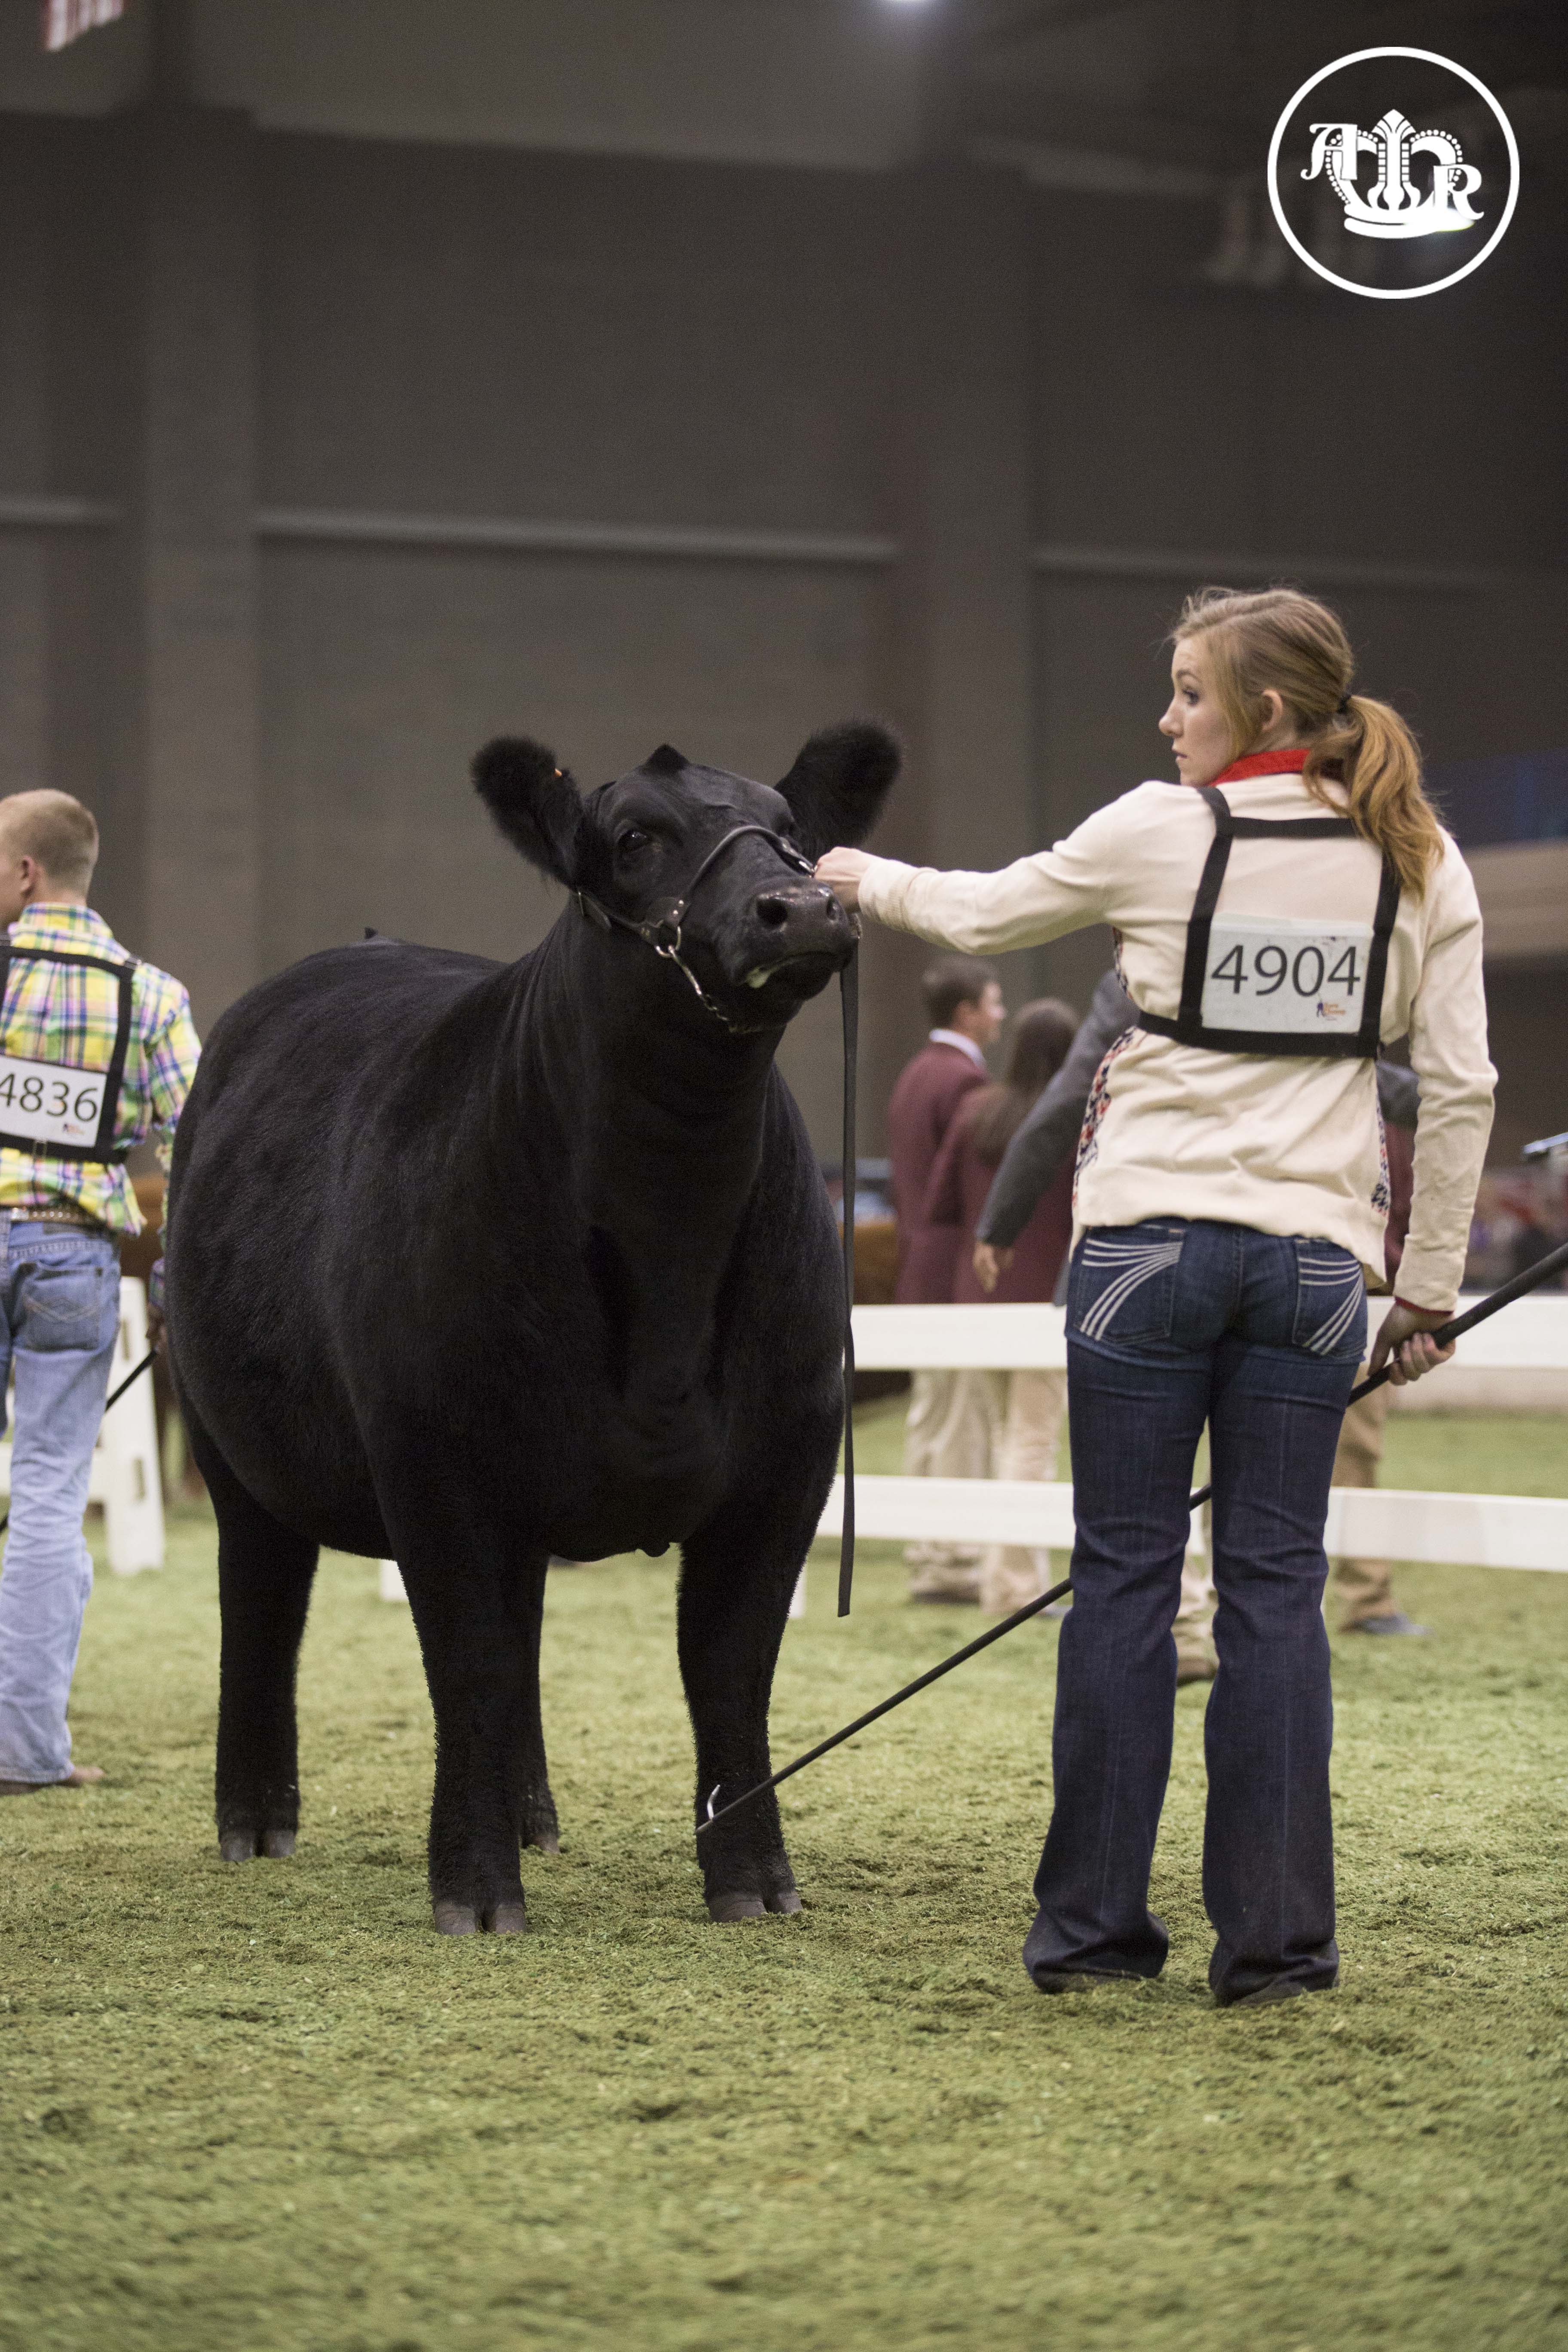 Junior Simmental Show ends the day at the American Royal